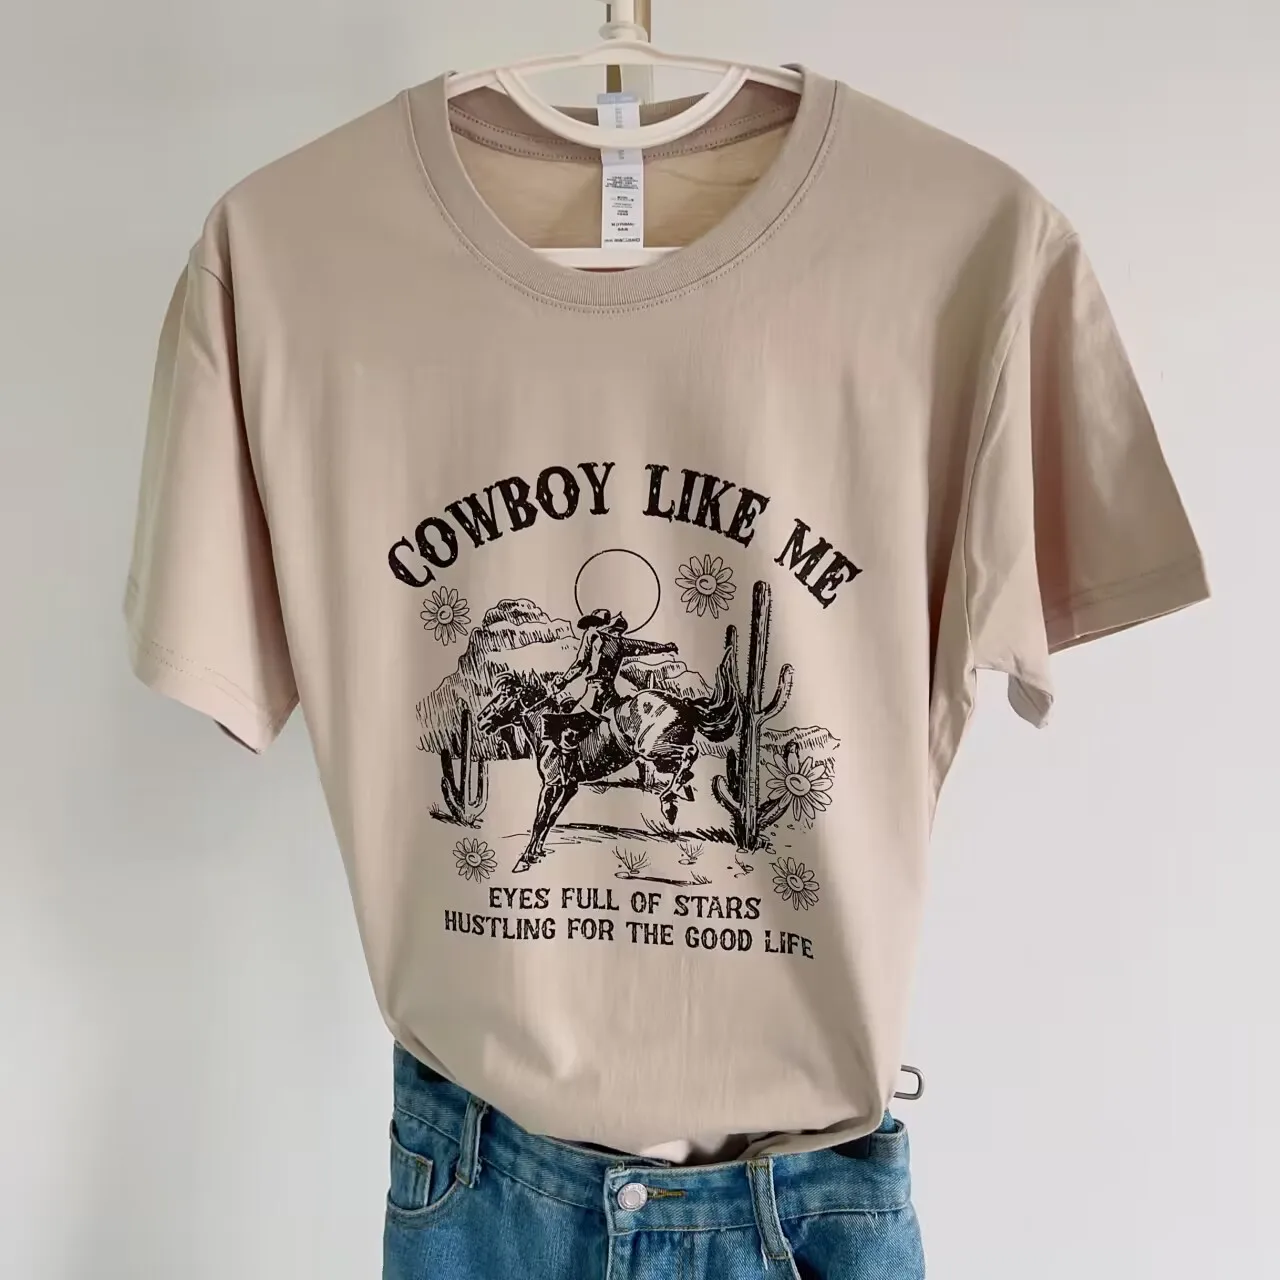 Cowboy Like Me Printed White T Shirt  Retro desert Tees Women Short Sleeve Cotton Fashion O-Neck Printing Tops abstract animal funny printed t shirt summer women short sleeve o neck tops fashion tie dye printed pullover tee lady streetwear